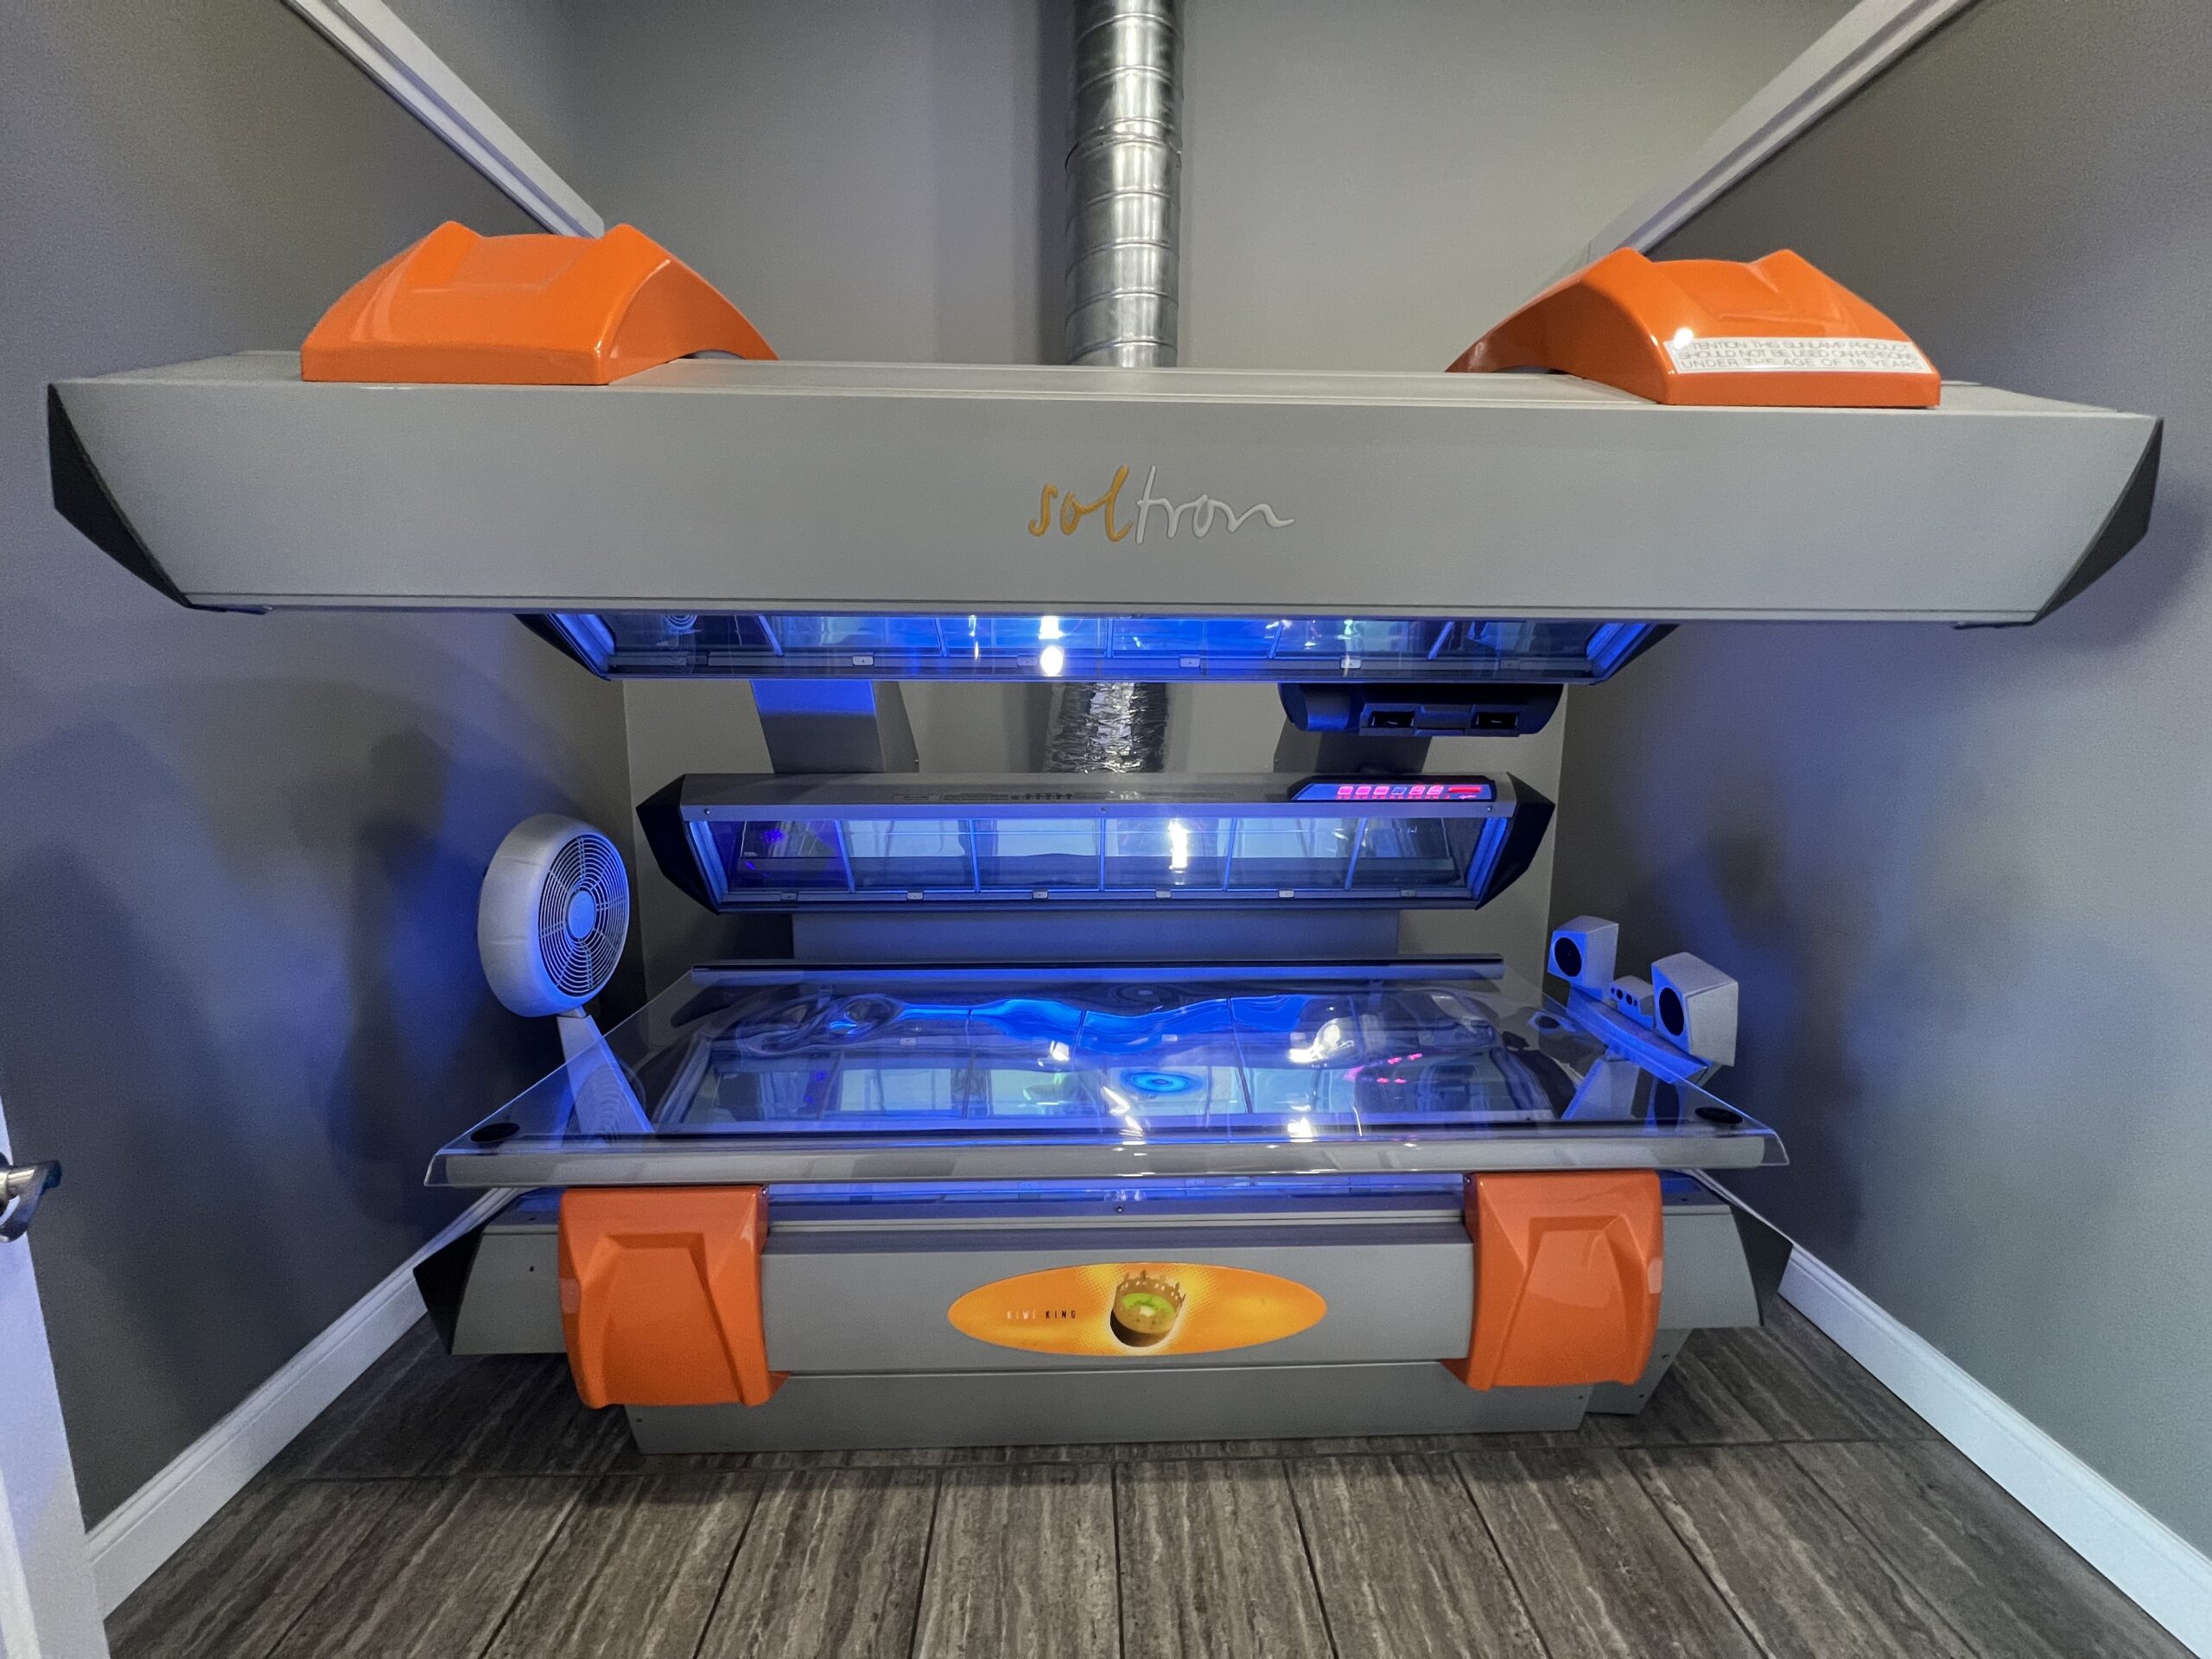 Modern Soltron tanning bed at Key Largo Tan & Spa in East Alton, IL, offering advanced tanning technology for optimal results.